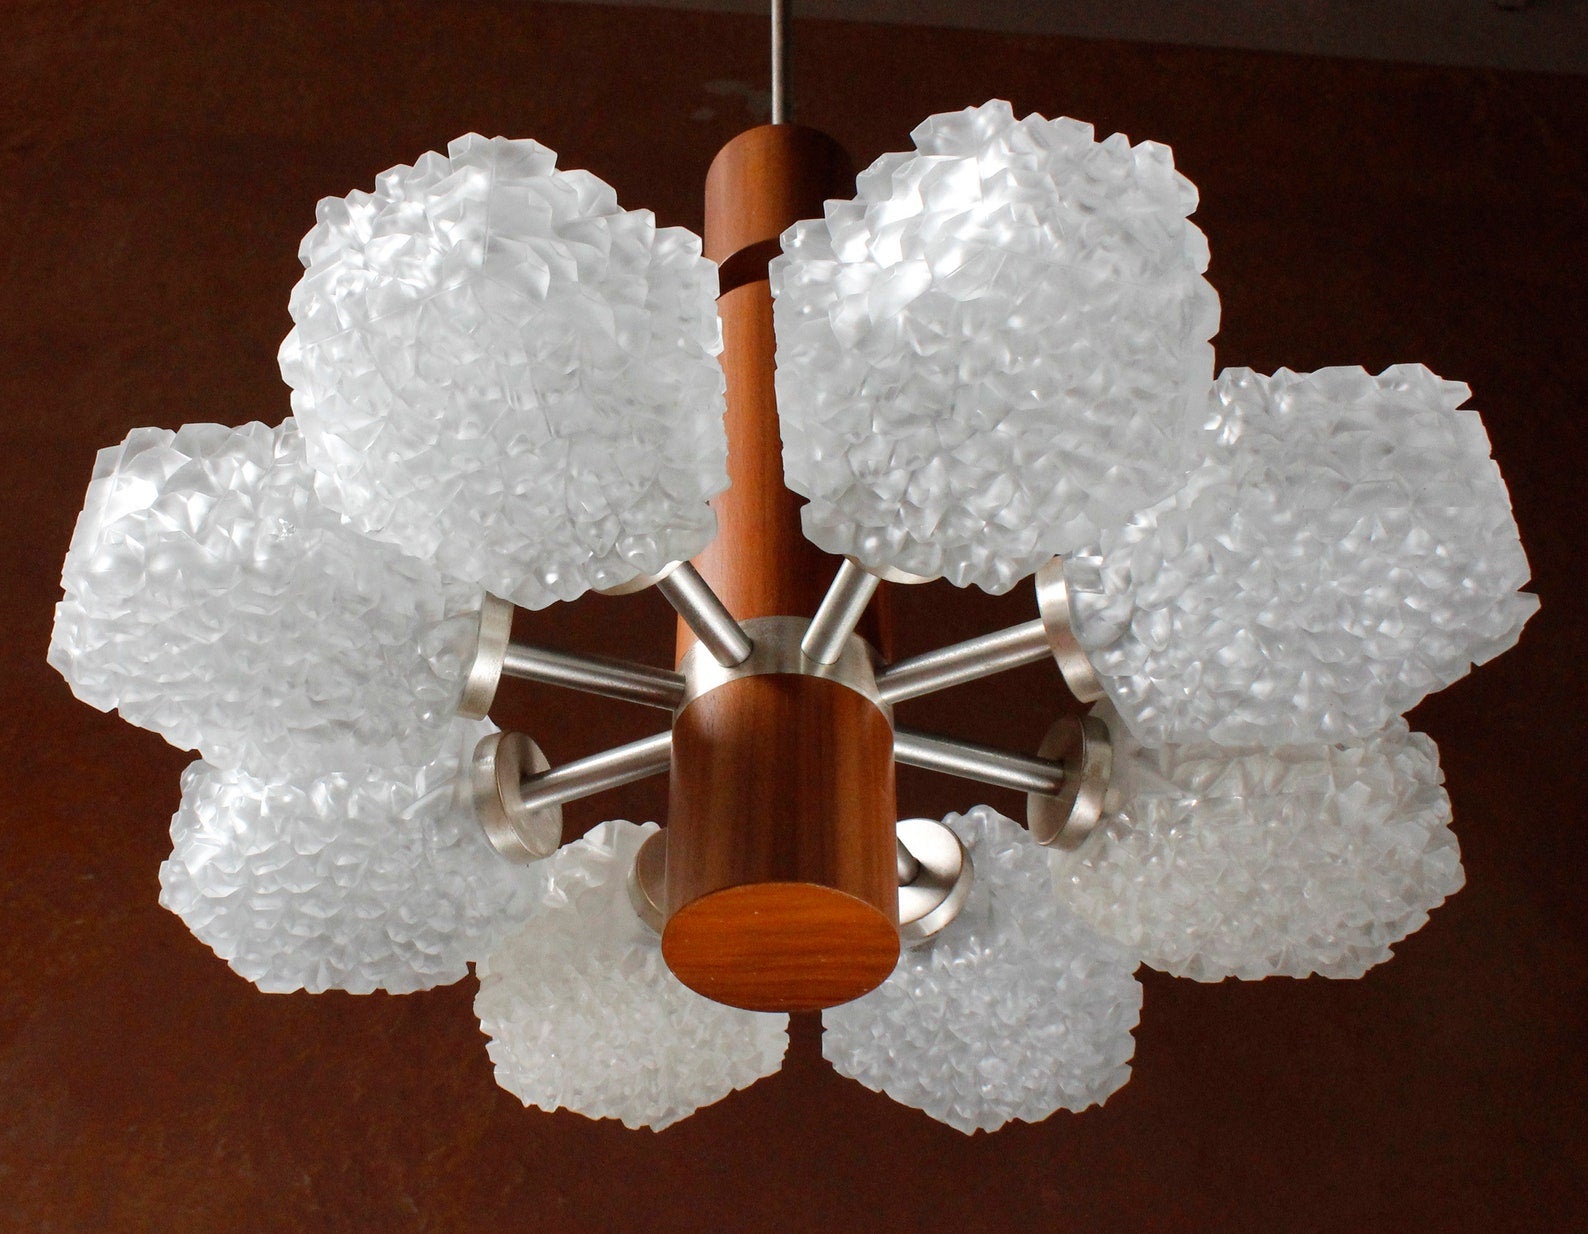 TEMDE MINIMALISTIC TEAK & MOULDED GLASS CHANDELIER, GERMANY 1960s WITH 8 LIGHTS (+ 1 SHADE FOR RESERVE, E14) 

DIAMETER 19,5